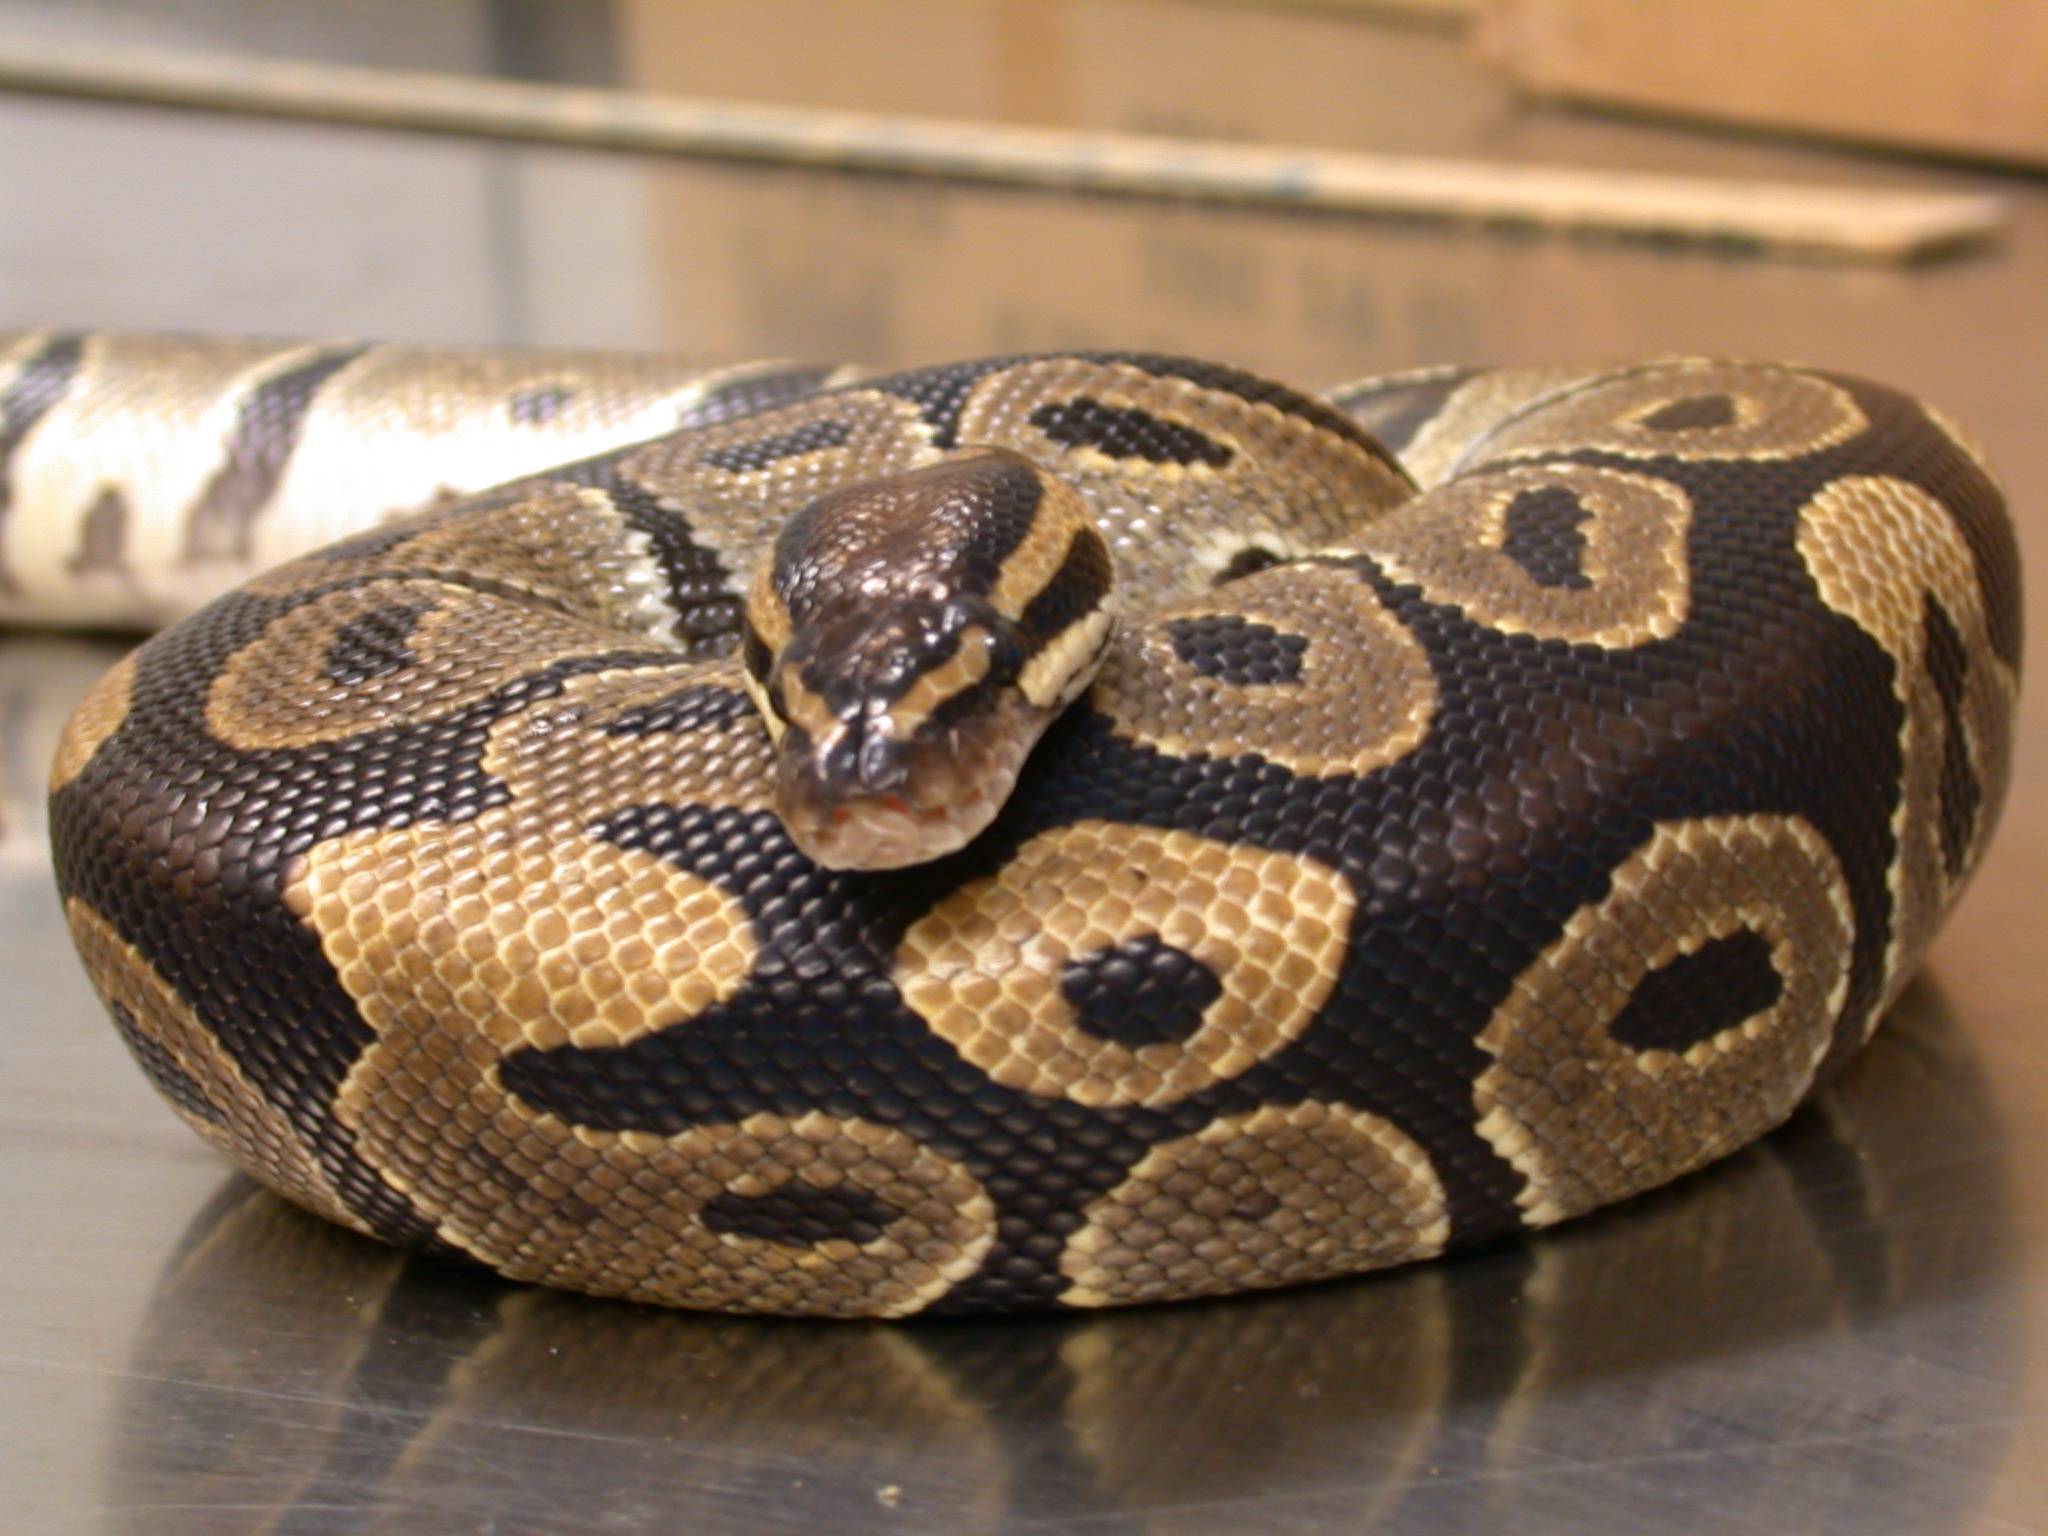 HD wallpaper Snake Ball Python Cute constrictor beauty reptile scale   Wallpaper Flare